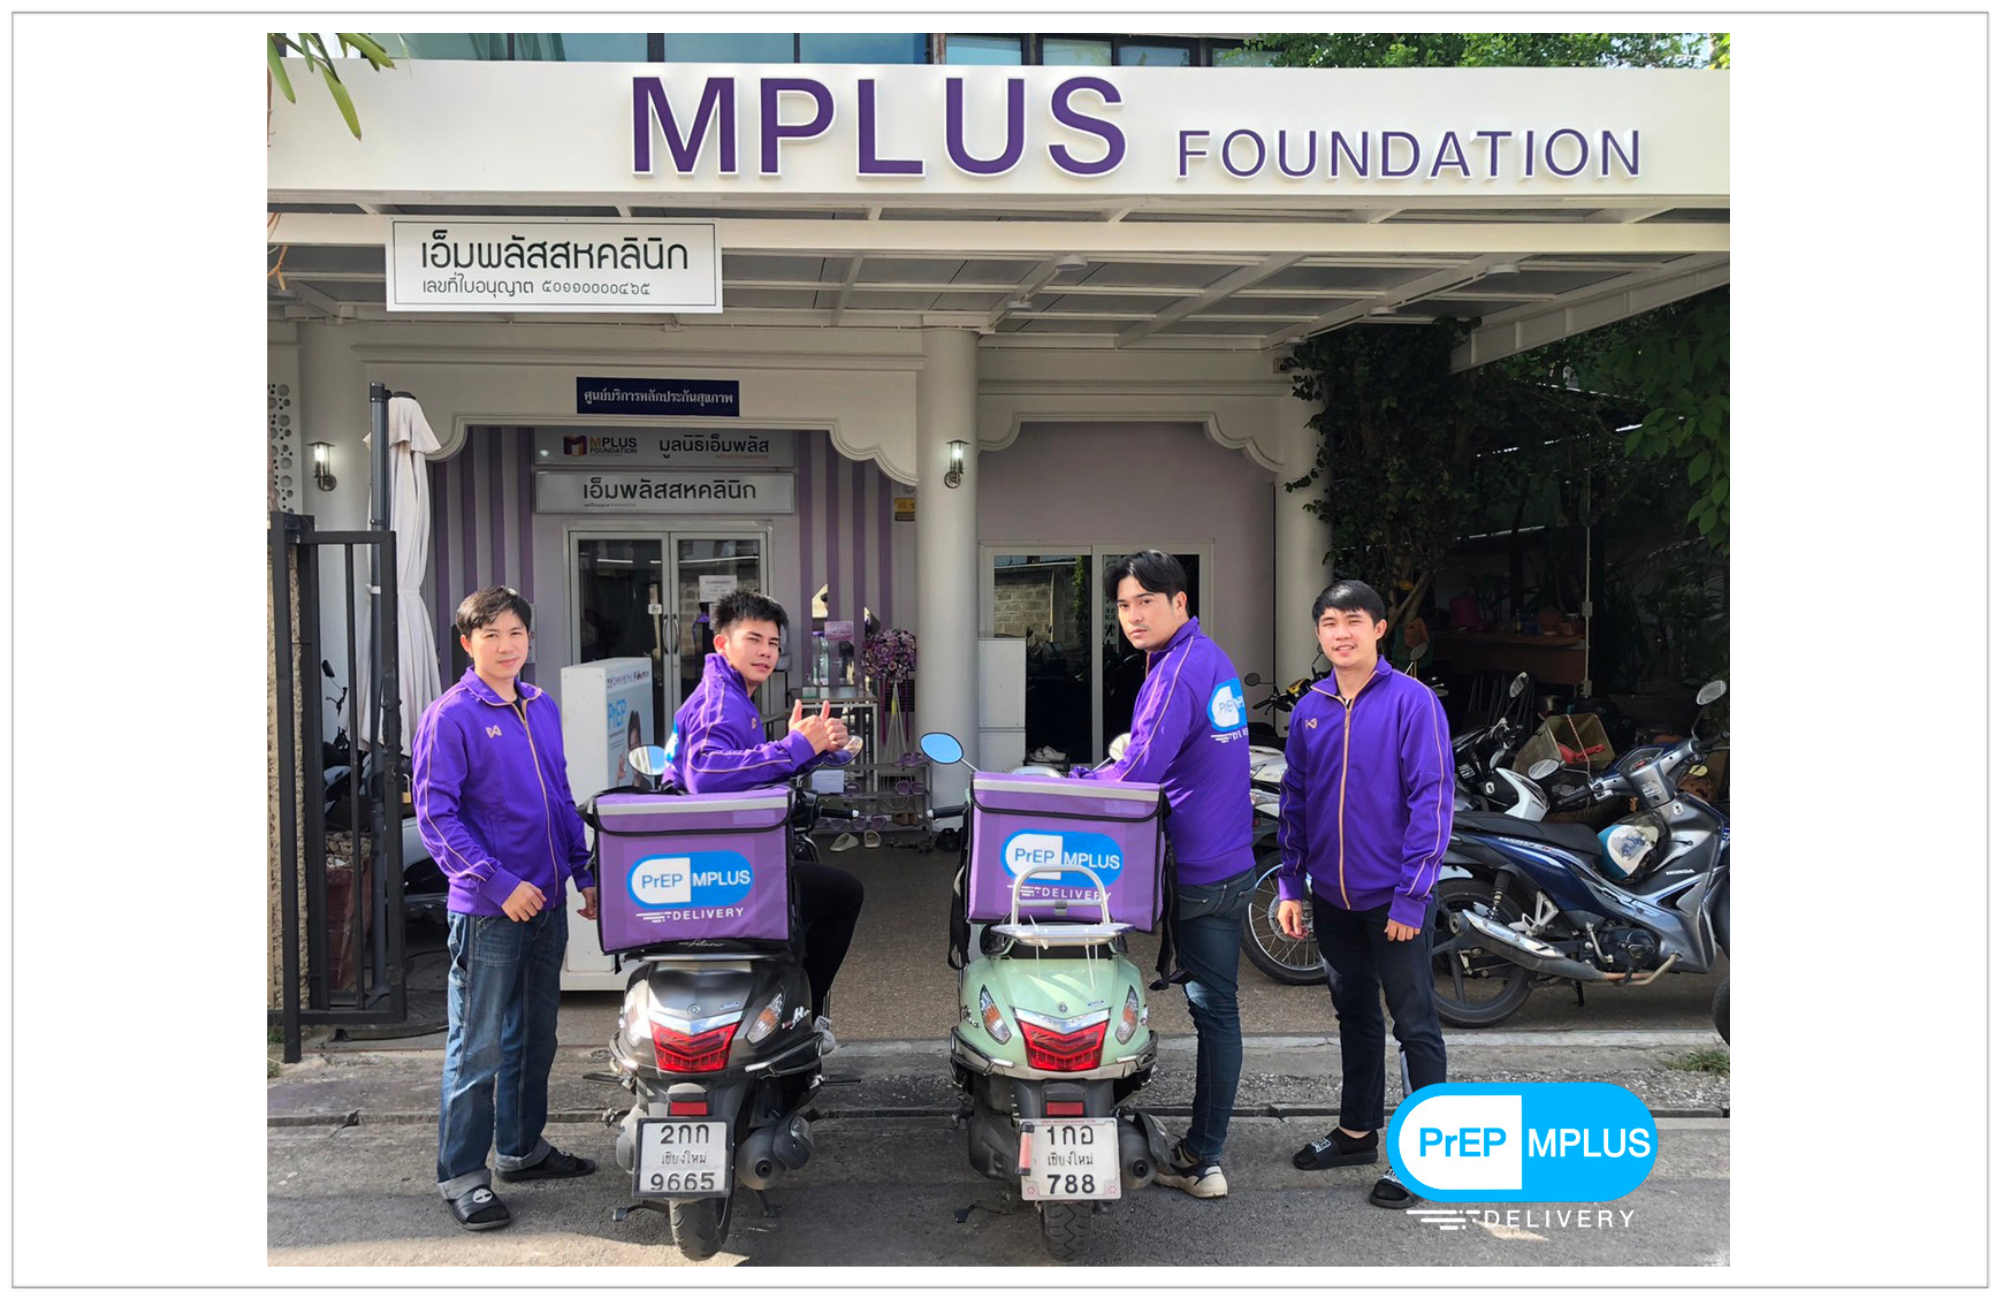 Deliveries to people’s homes and discreet pick-up locations have helped the scale-up of PrEP in Thailand, but may no longer be provided. Image from MPLUS Foundation.